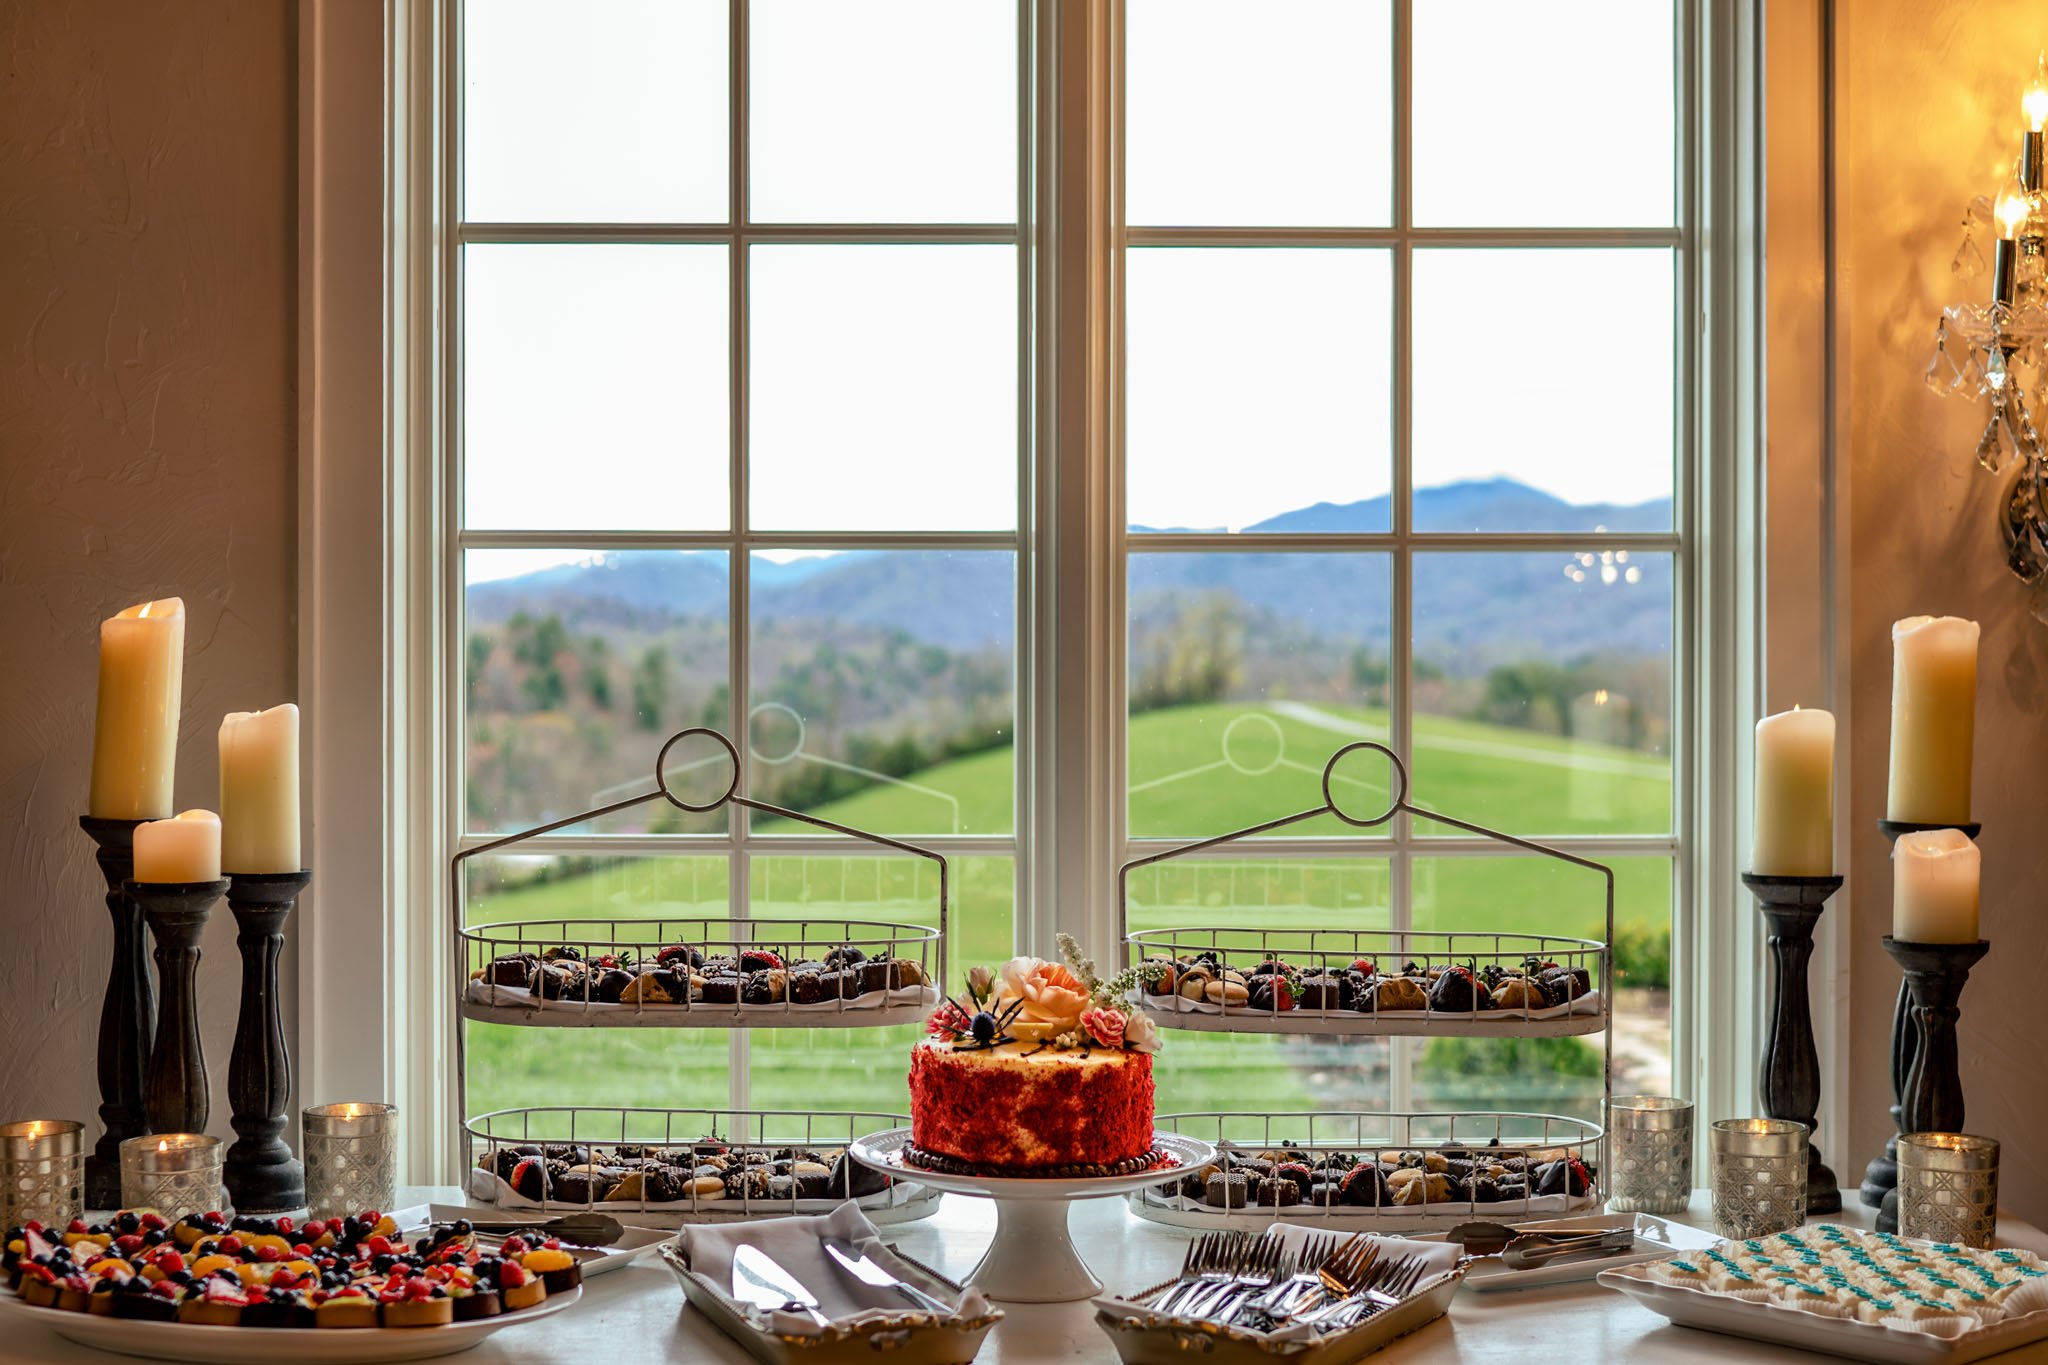 Elegant dessert table by a large window overlooking a scenic mountain view at The Ridge Asheville, featuring a cake, candles, and assorted sweets.